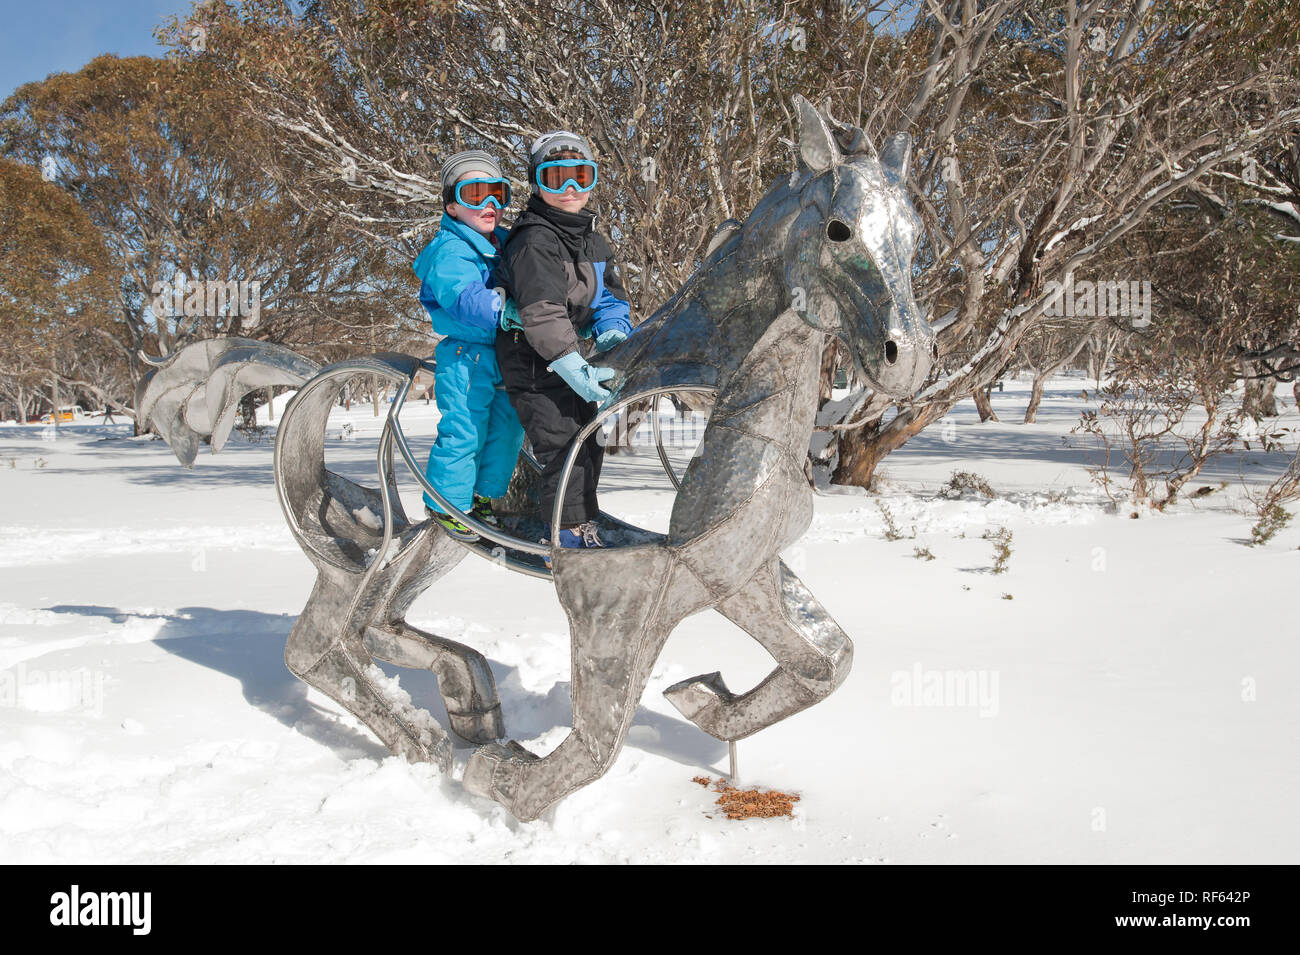 2 young boys on playground equipment in the snow, Dinner Plain on the Great Alpine Road, Victoria, Australia Stock Photo